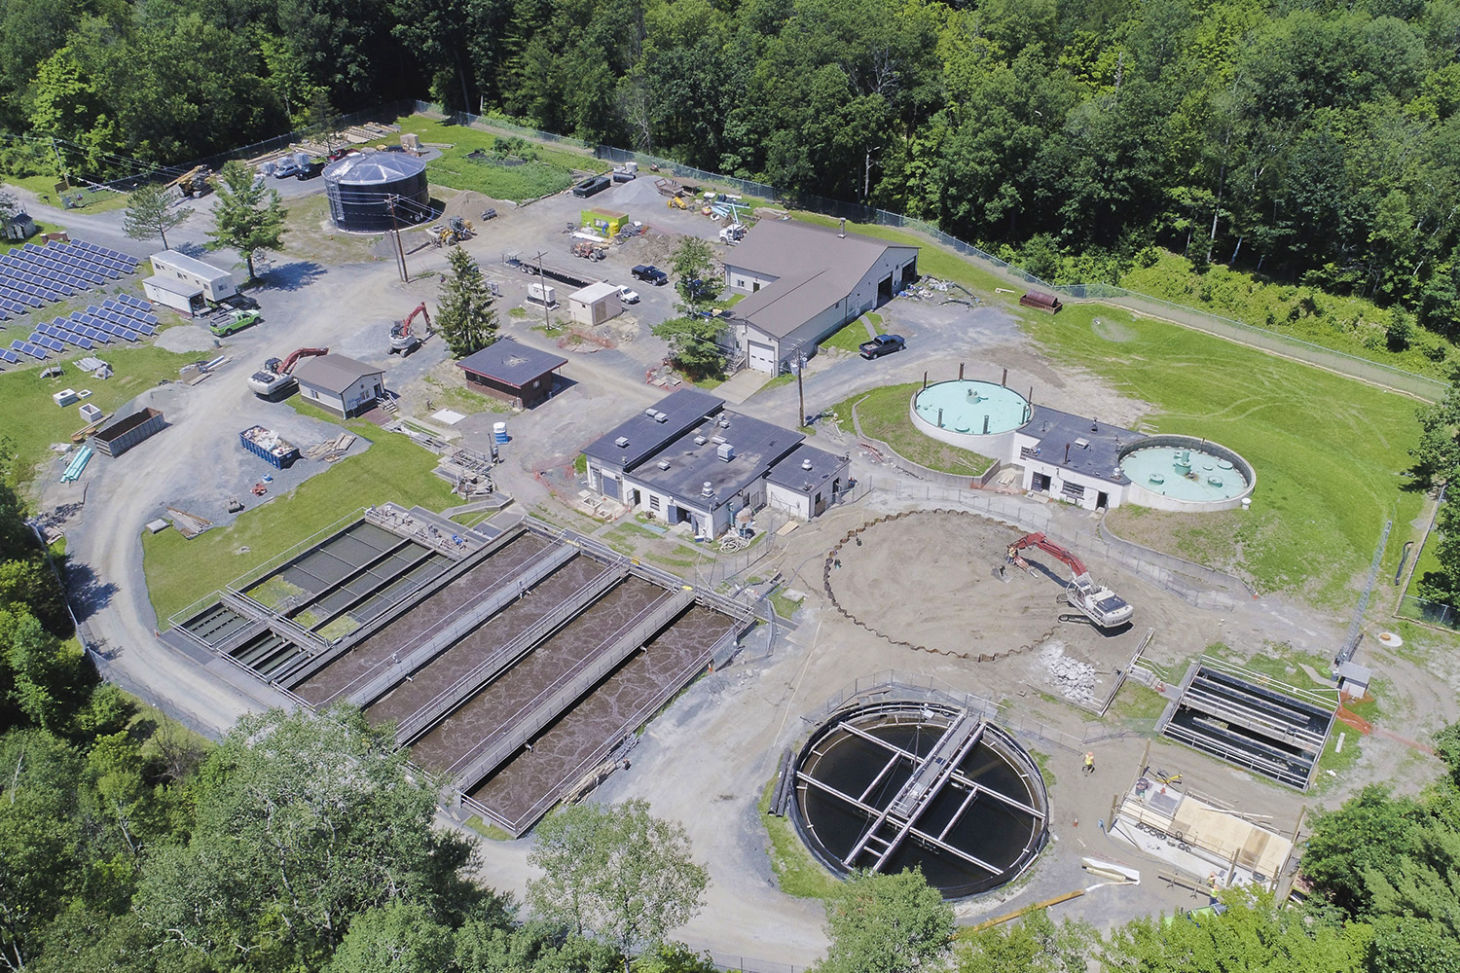 Town of Niskayuna Wastewater Treatment Plant - During Construction